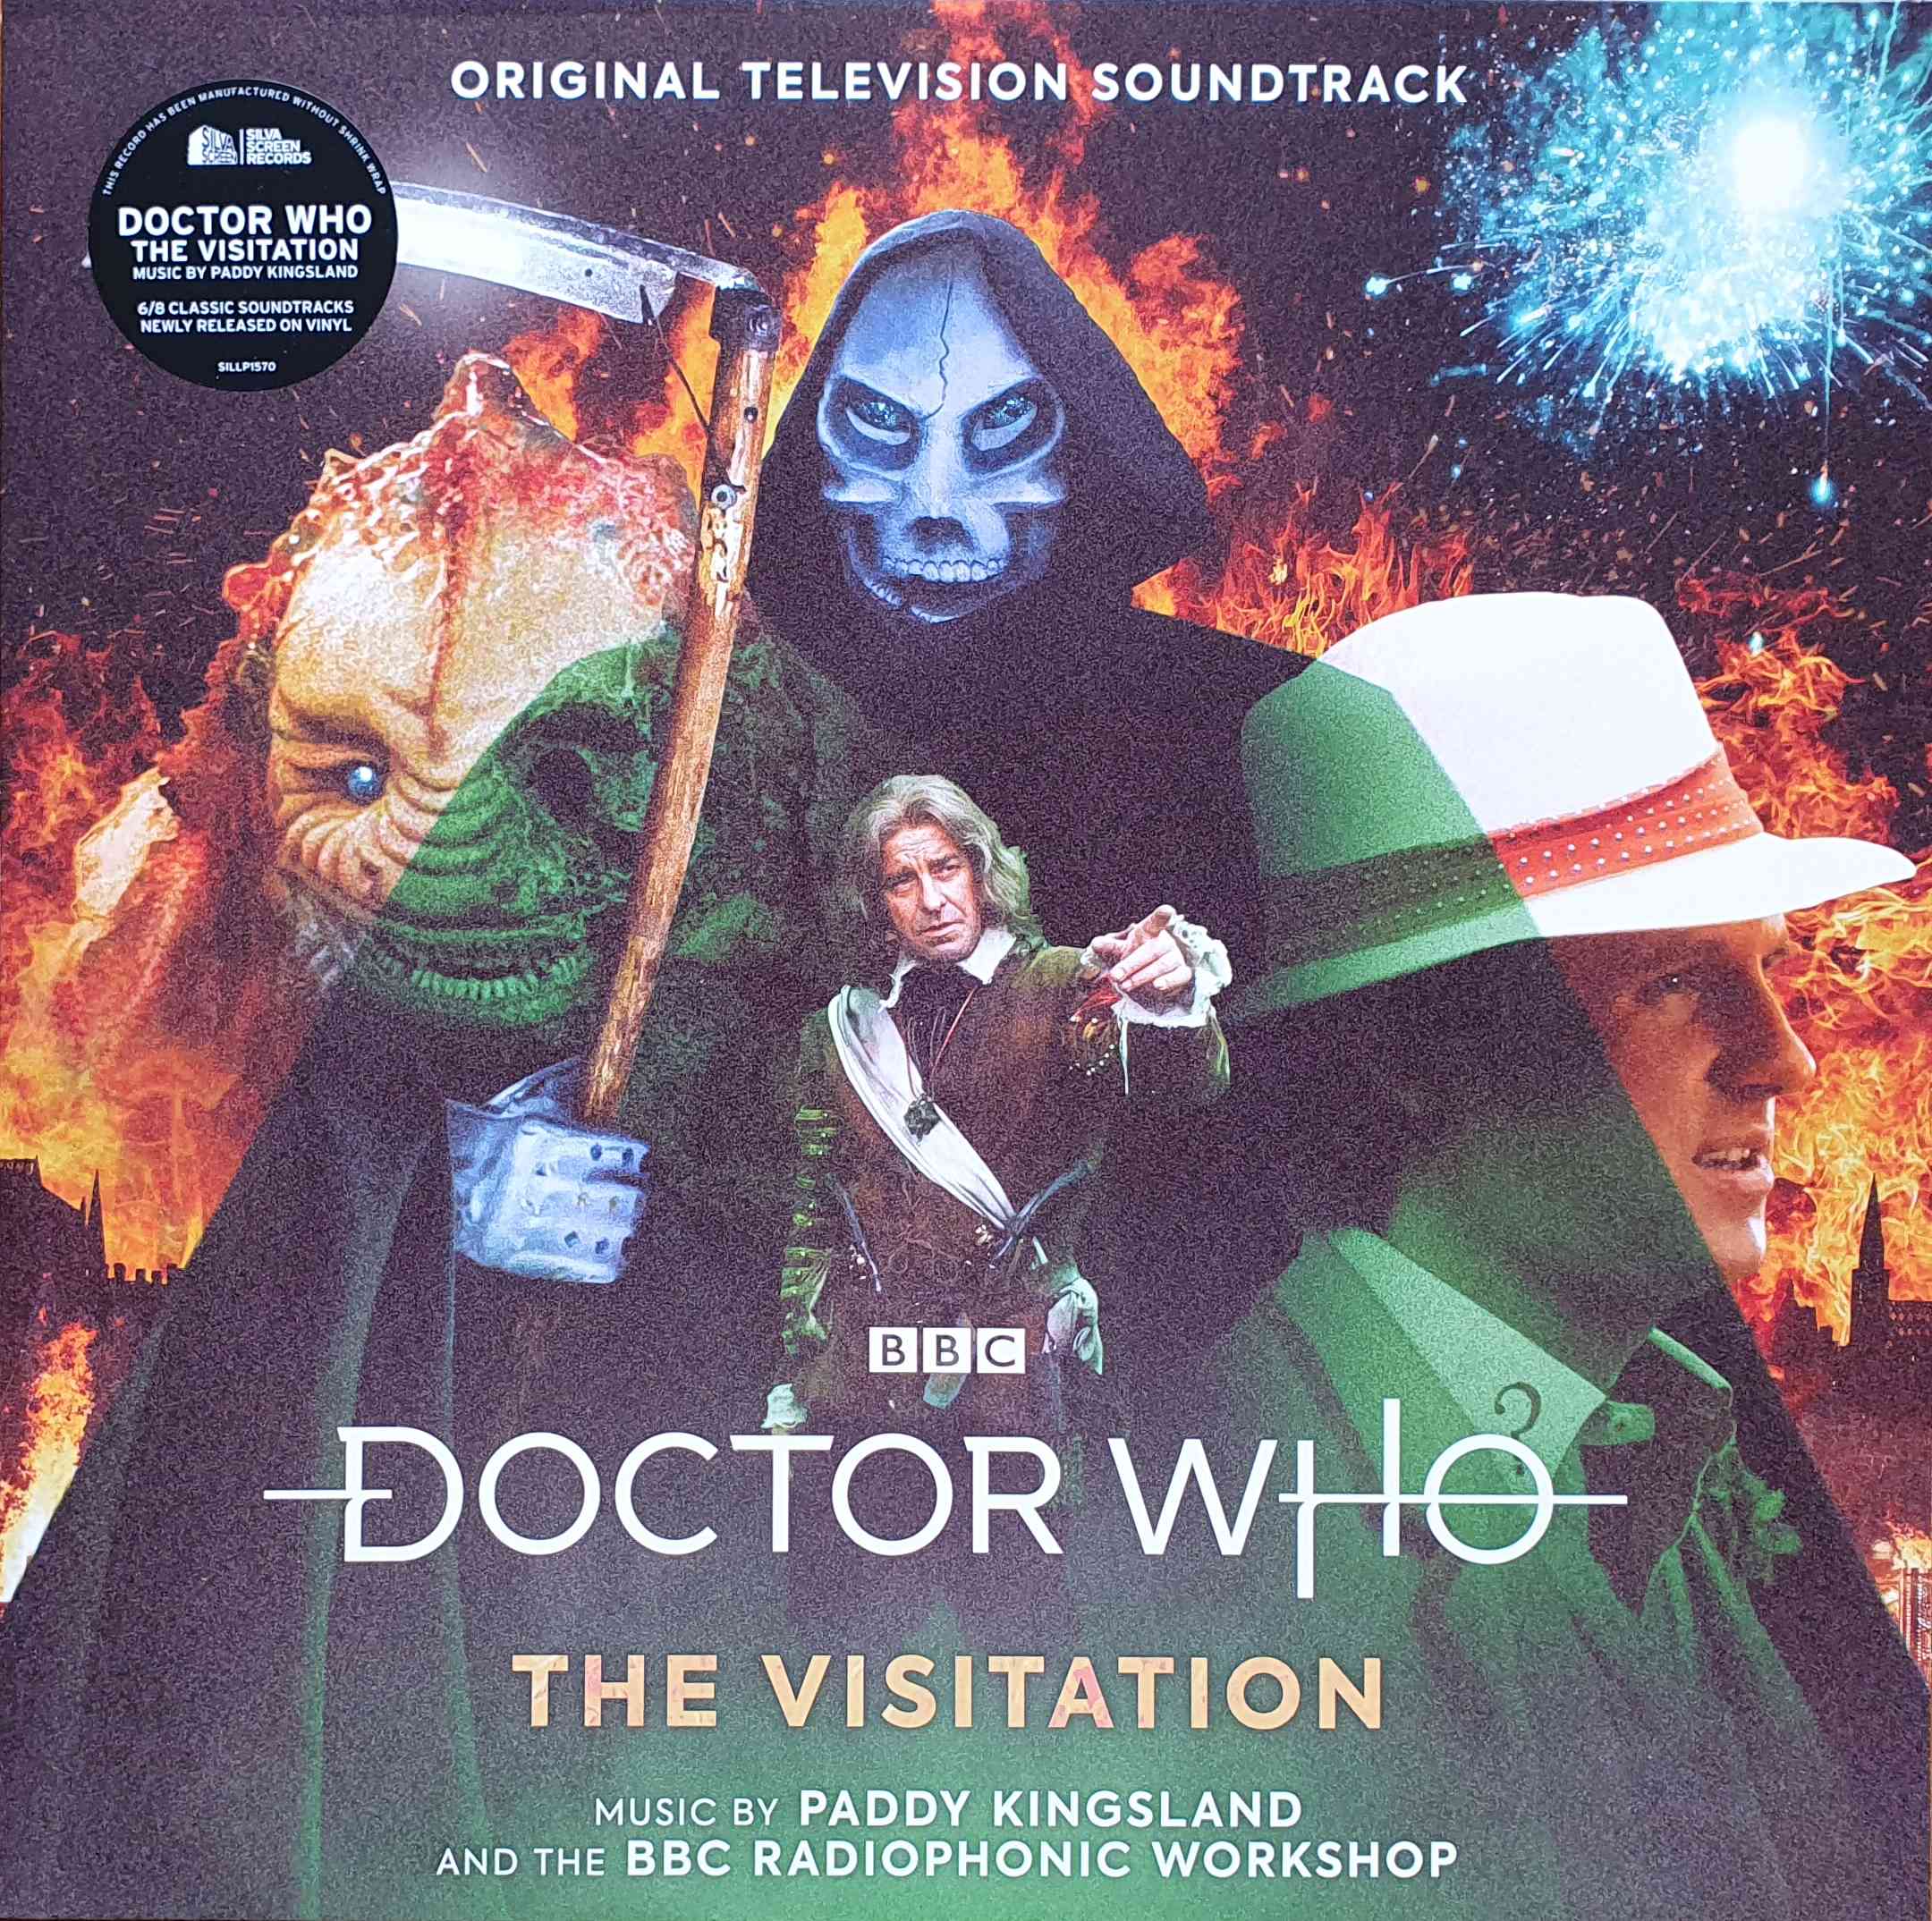 Picture of Doctor Who - The visitation by artist Paddy Kingsland / BBC Radiophonic Workshop from the BBC albums - Records and Tapes library